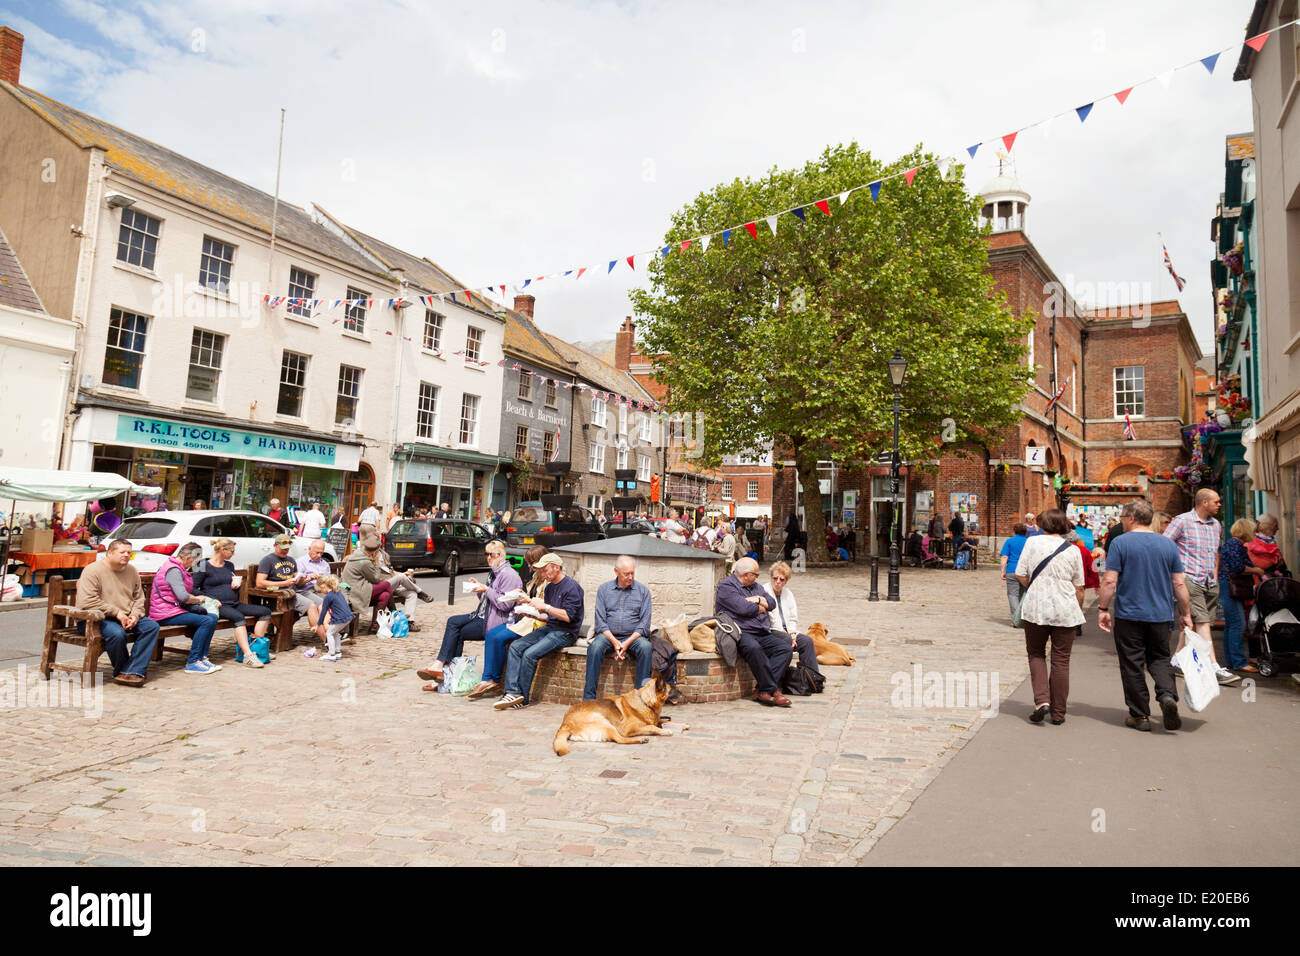 People sitting in the town square on market day, Bridport, Dorset England UK Stock Photo